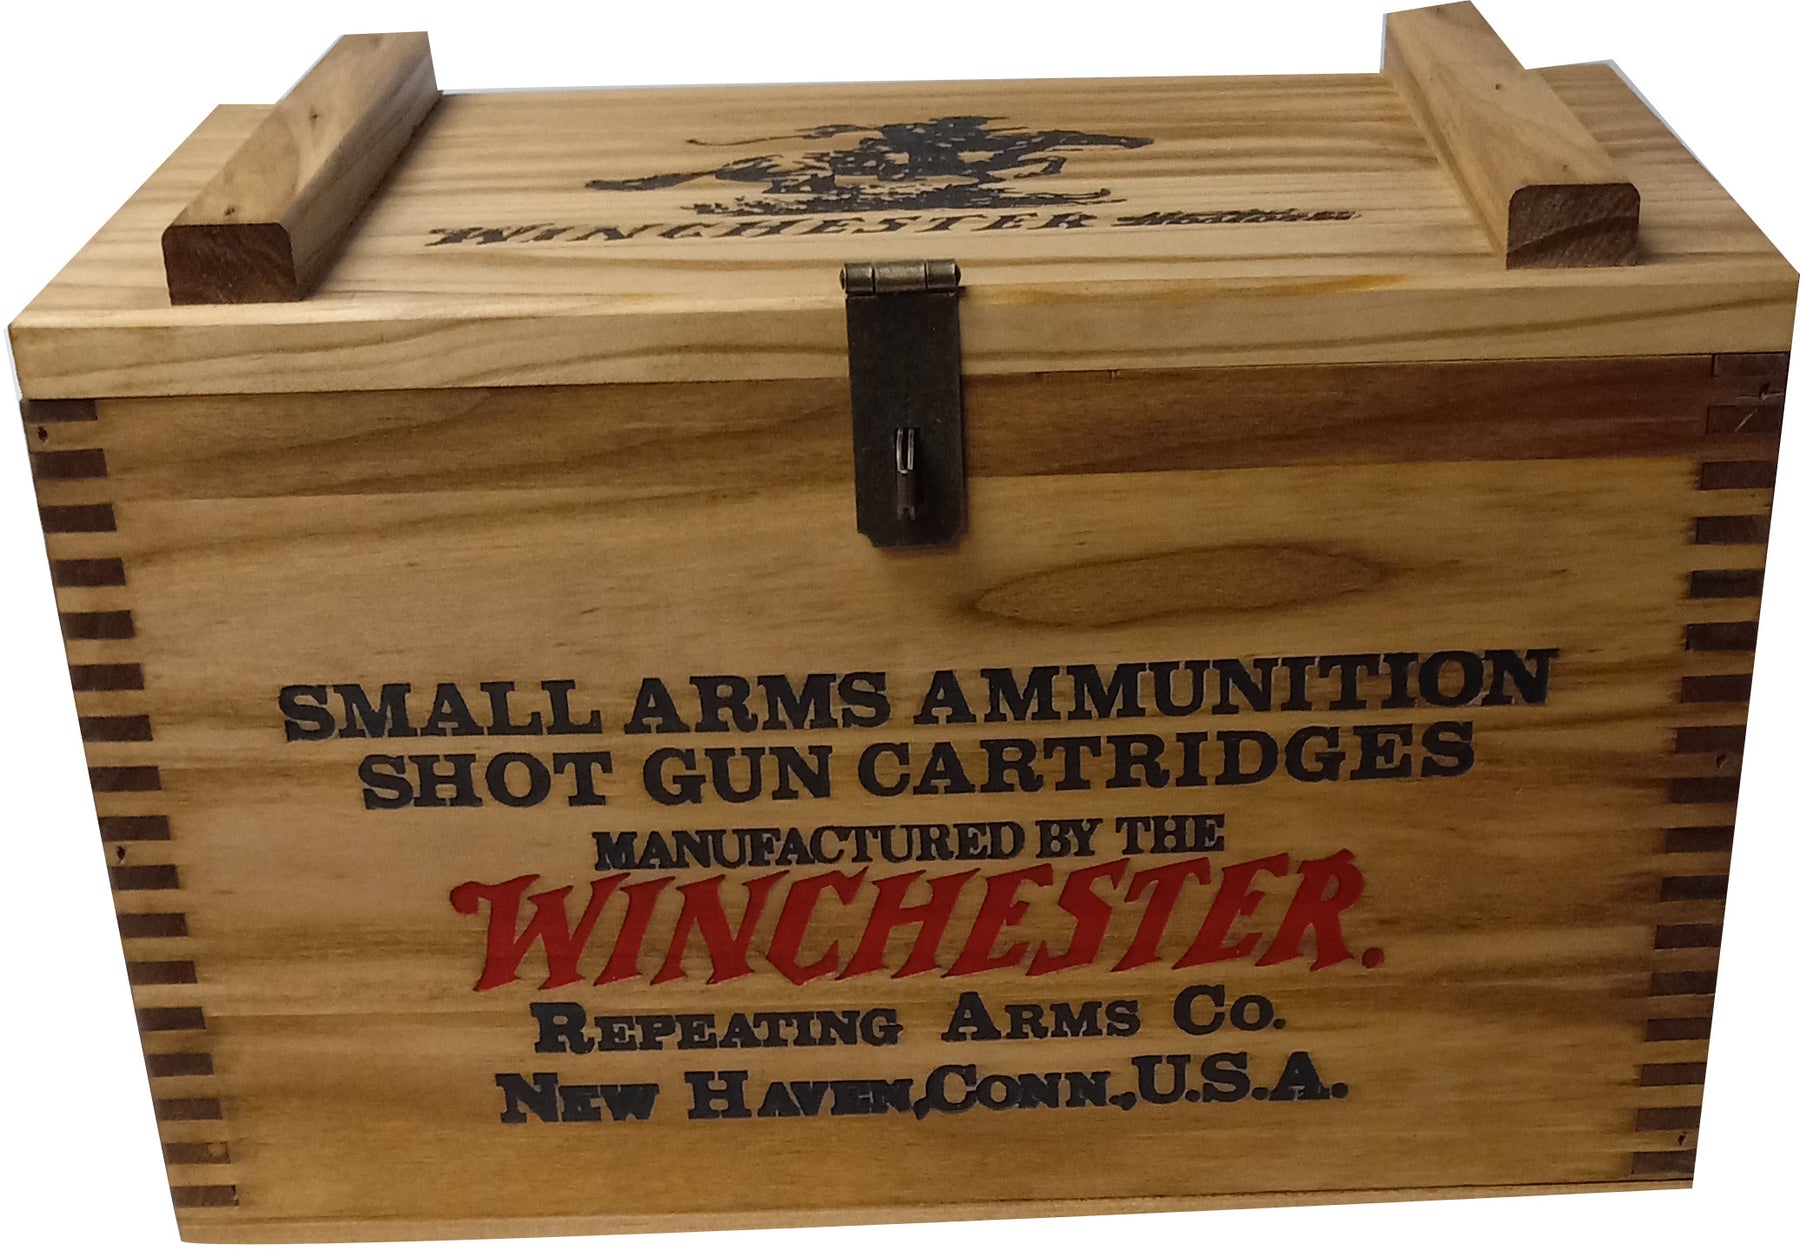  Winchester WOODEN 250 SHELL AMMO BOX Brand Vintage Wooden Ammunition  Box – Made in USA : Home & Kitchen